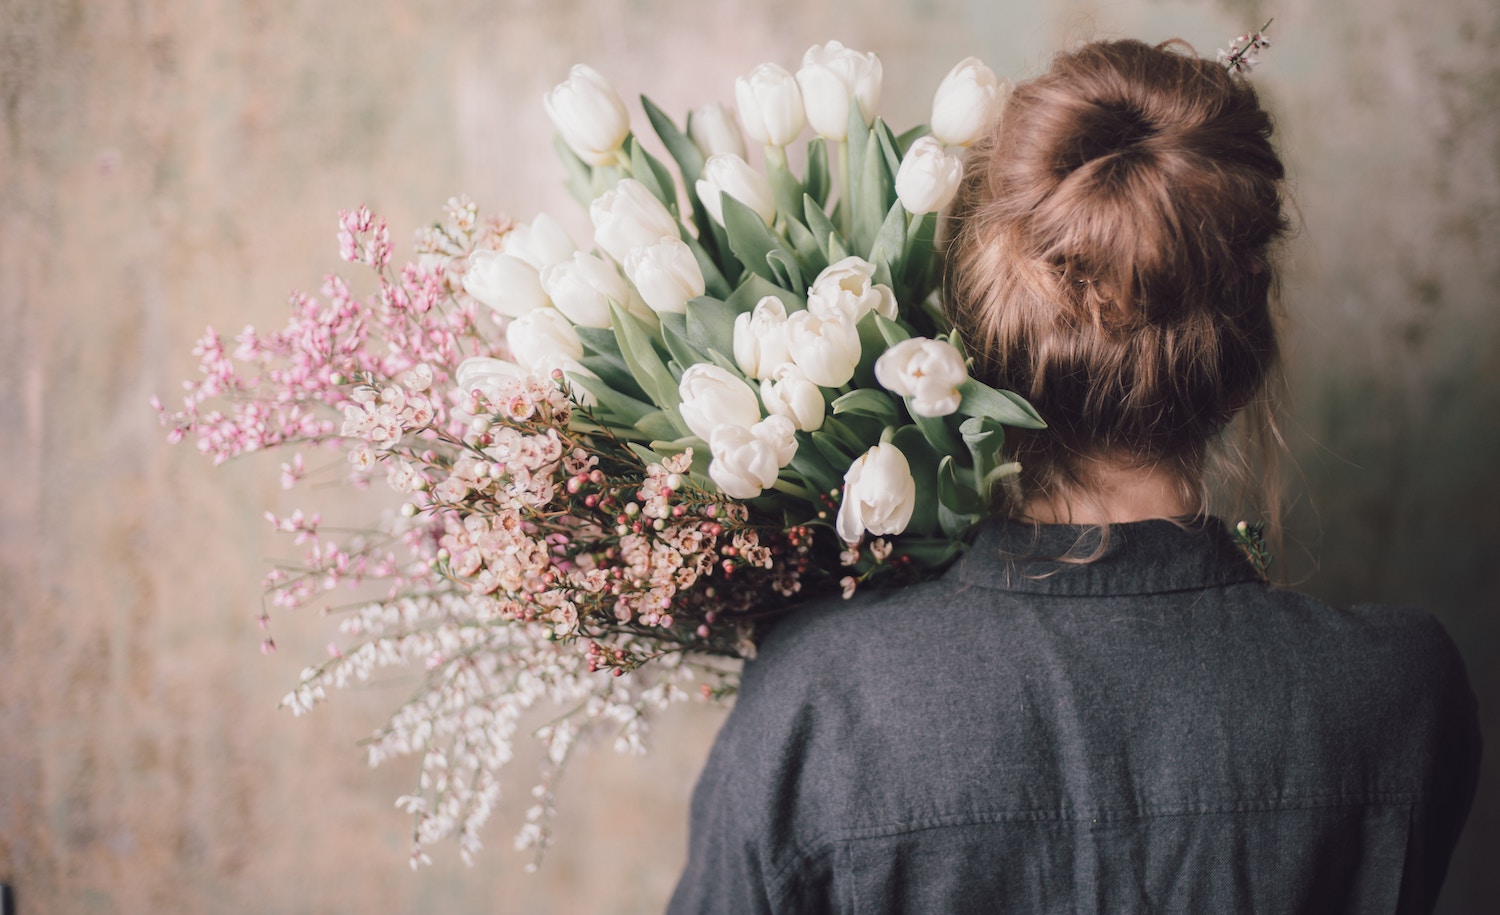 a sensitive introvert carrying flowers says no